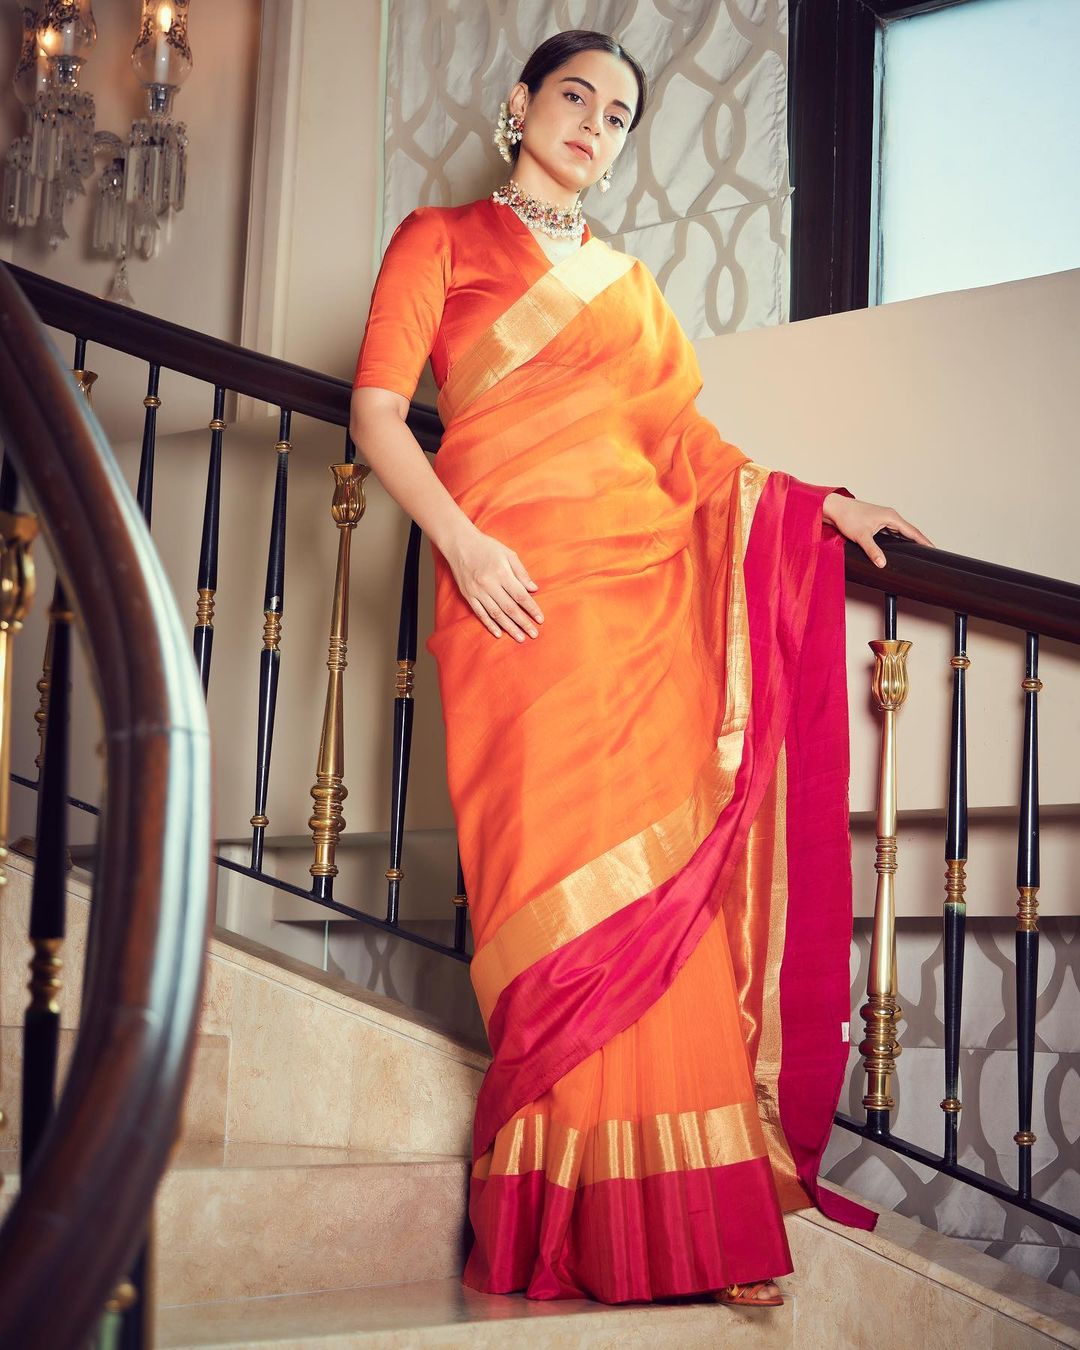 Kangana Ranaut Holds Her 'Queen' Title Strong With Her Bold Saree Lewks,  From Extravagant Silk To Contemporary Patterns, She's The Bespoke 'Desi'  Maharaani Of B-town & You Can Go Argue With The